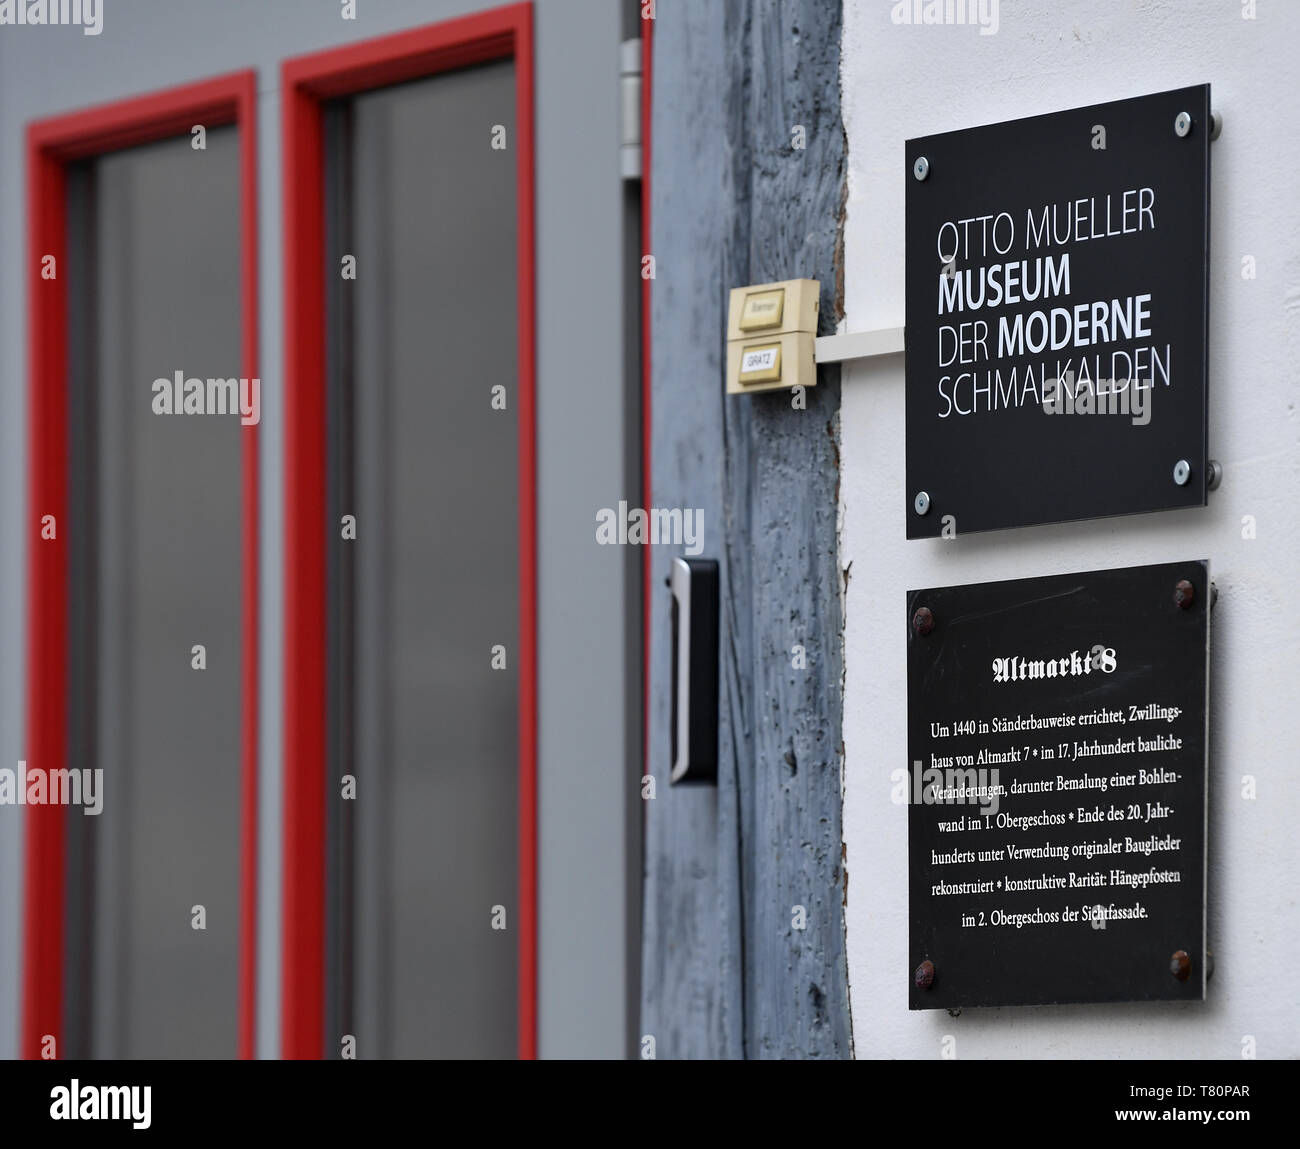 10 May 2019, Thuringia, Schmalkalden: A sign hangs next to the door of the Otto Mueller Museum der Moderne in Schmalkalden. The museum was set up in a restored half-timbered house on Schmalkalder Altmarkt. Large parts of the work of the German expressionist Otto Müller are shown on two floors. The museum opens on 11 May. Photo: Martin Schutt/dpa-Zentralbild/dpa Stock Photo